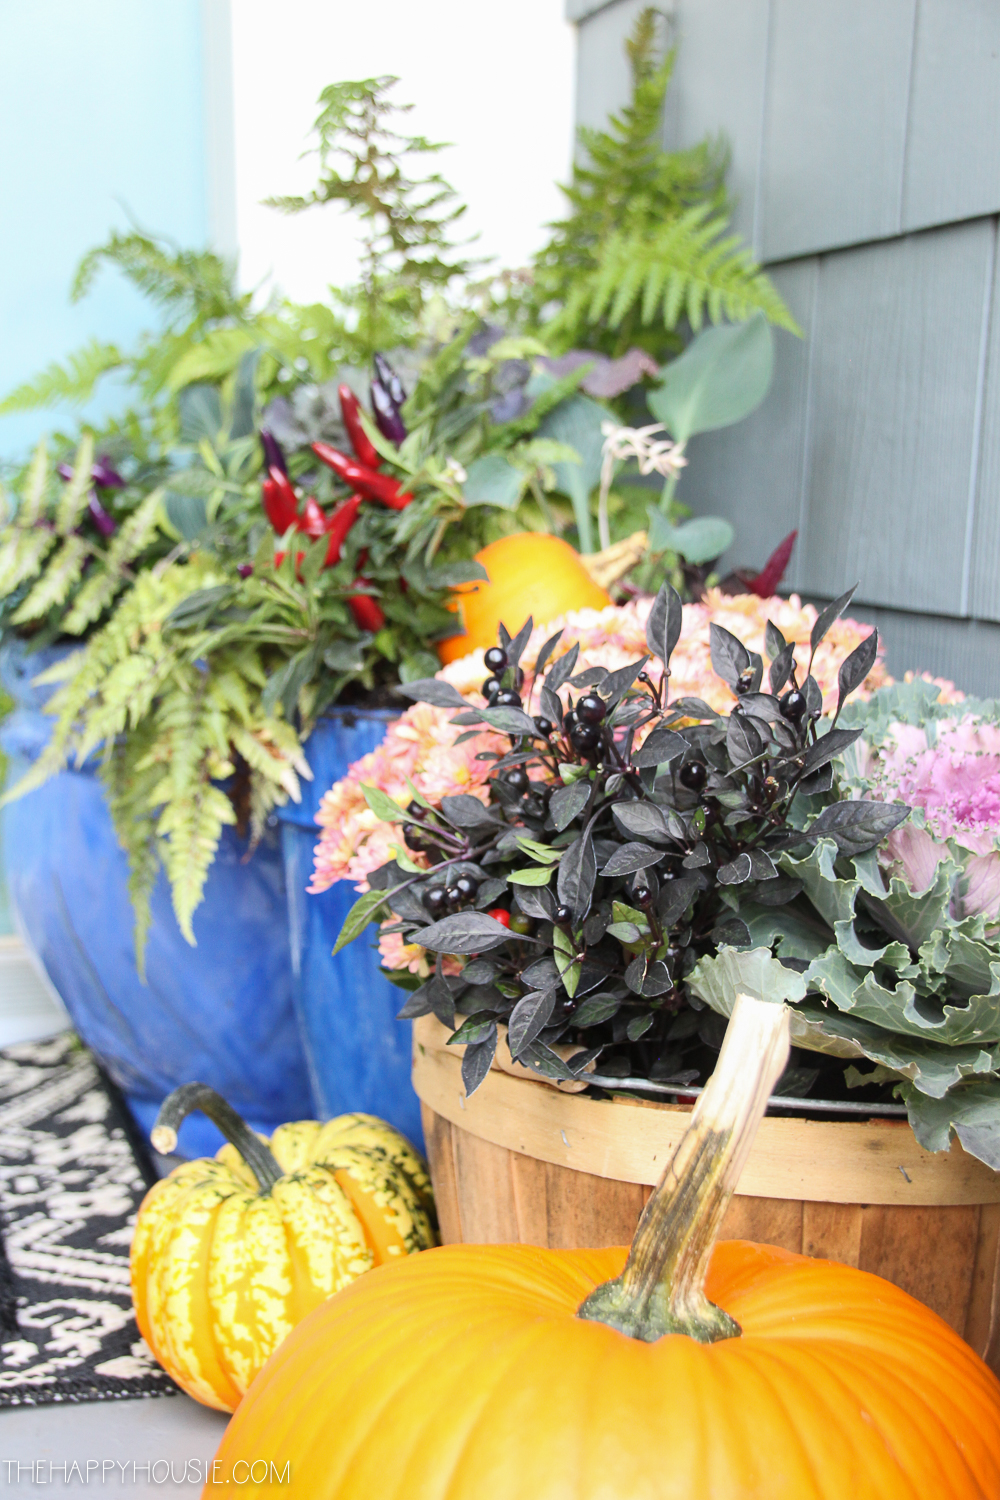 A blue planter beside the rustic wooden planter filled with plants and flowers.